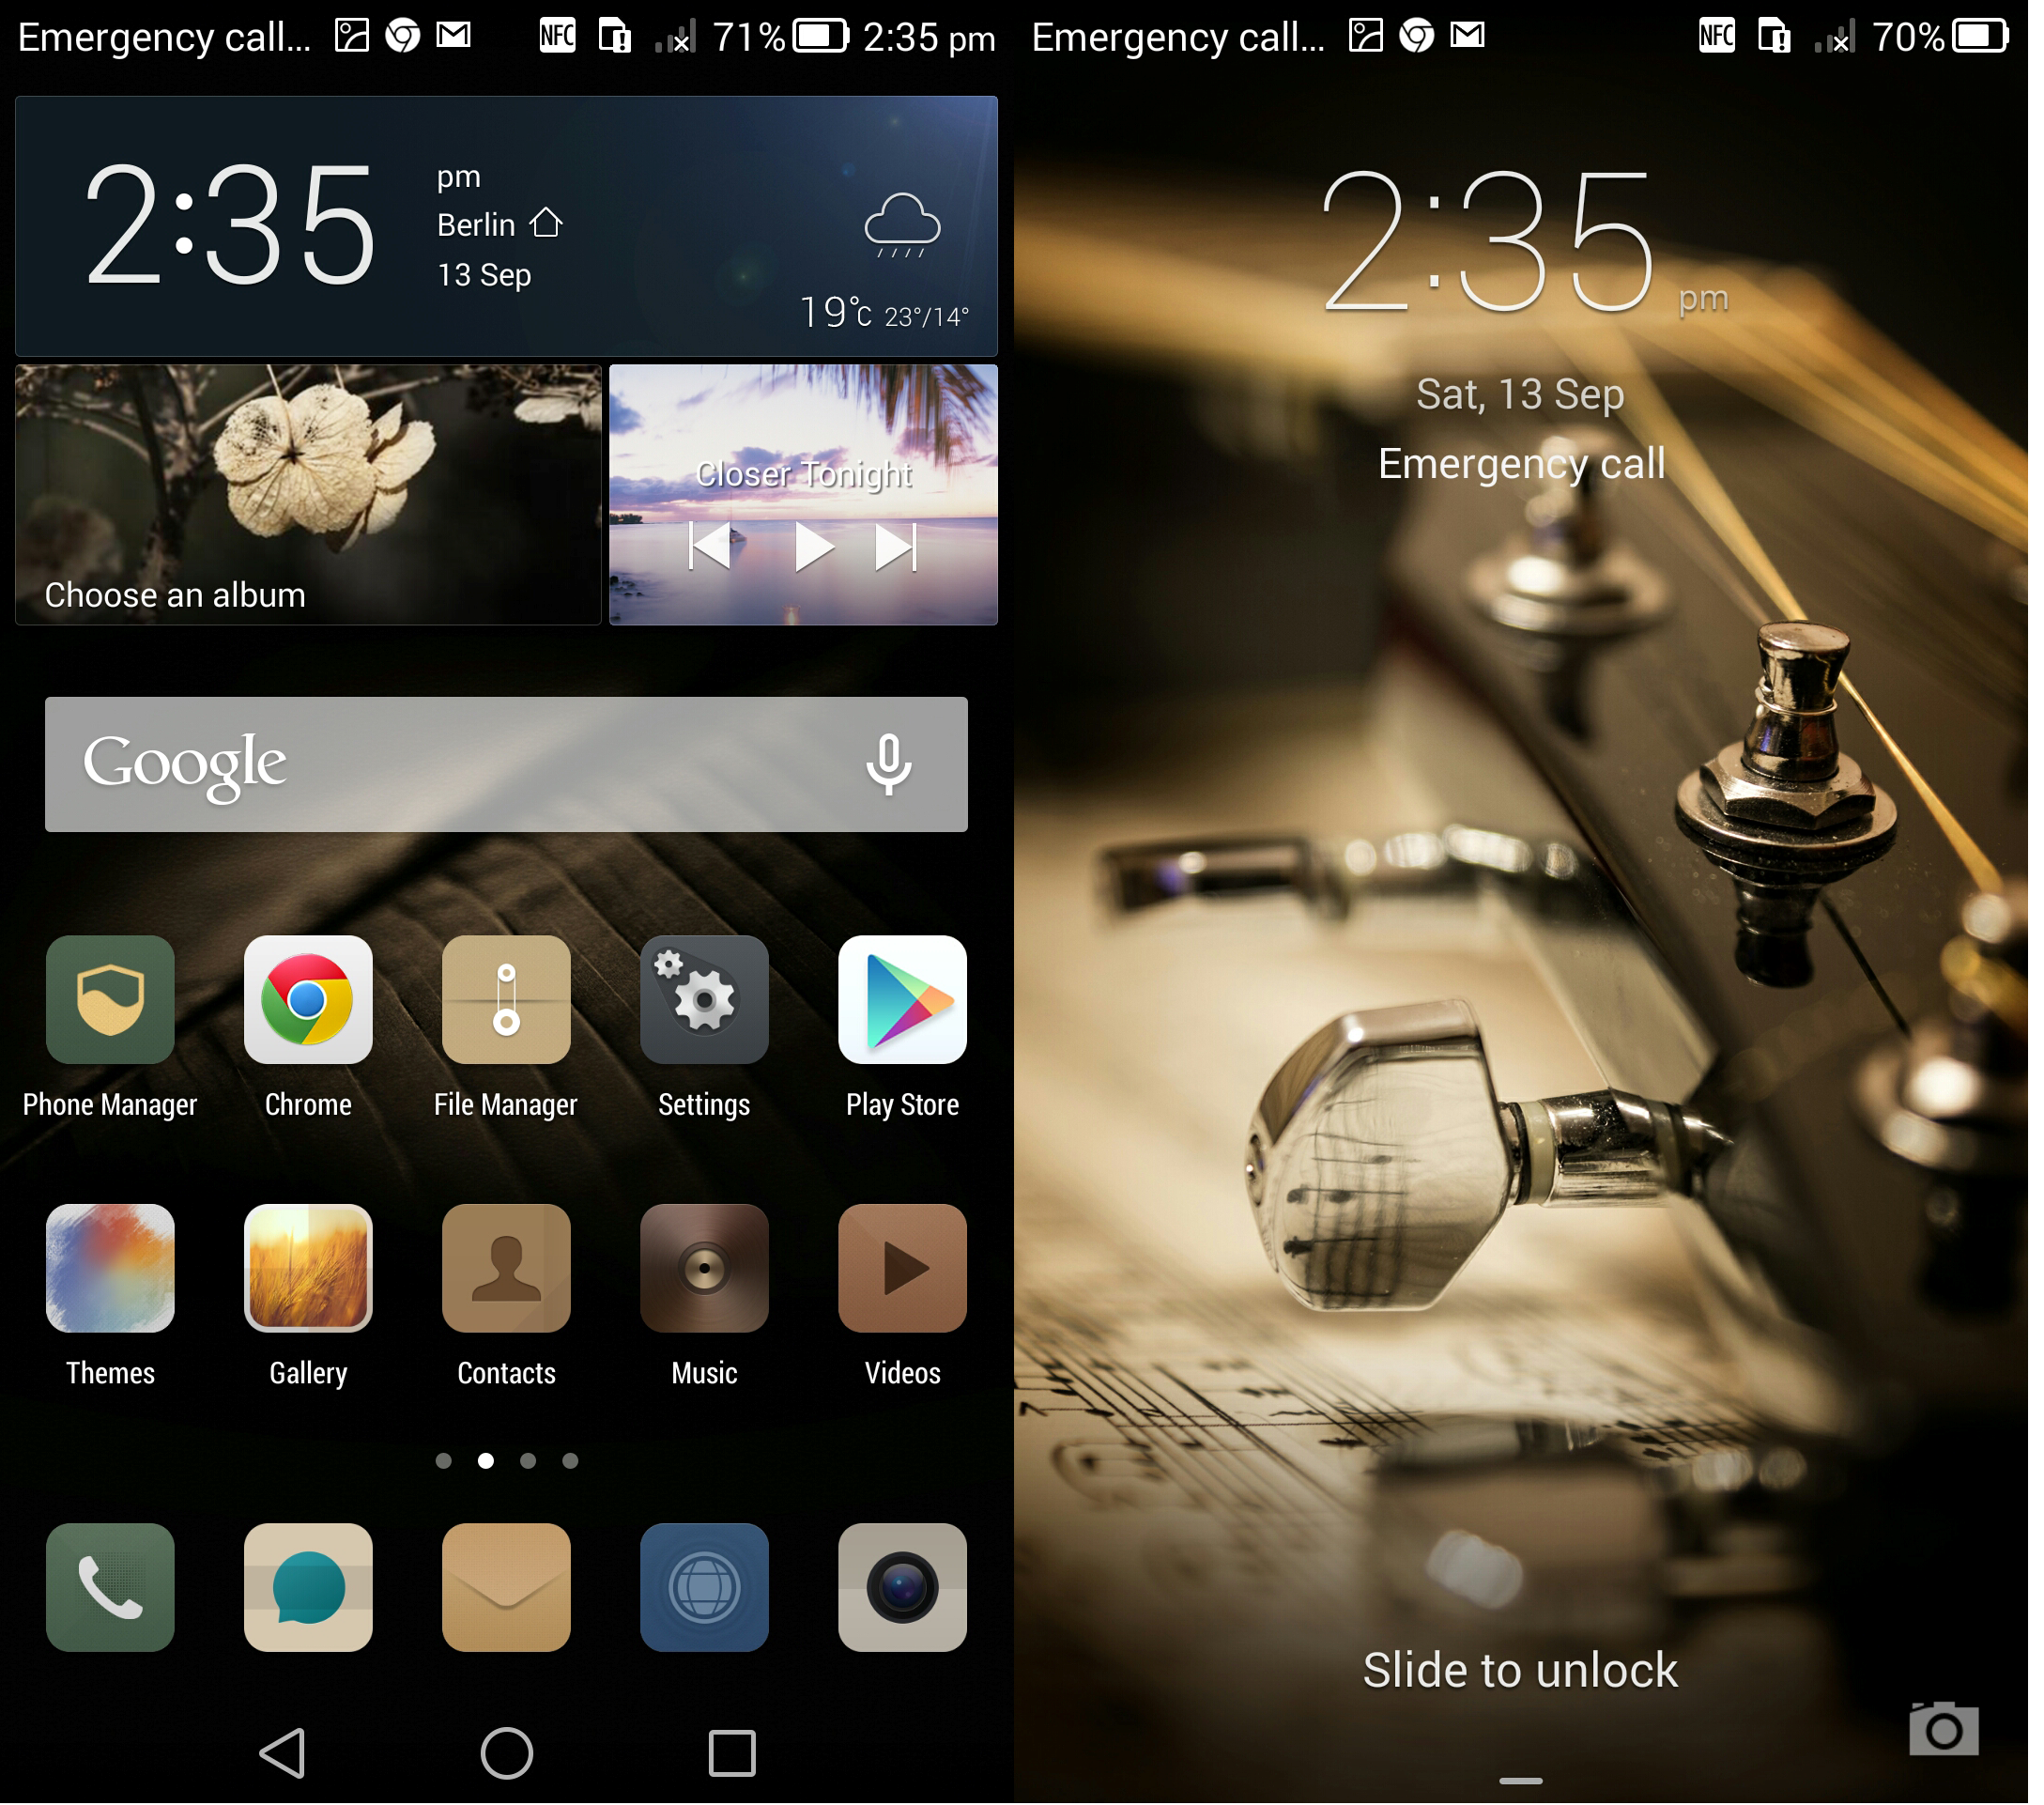 Huawei-Ascend-Mate-7-Simple-Life-Theme